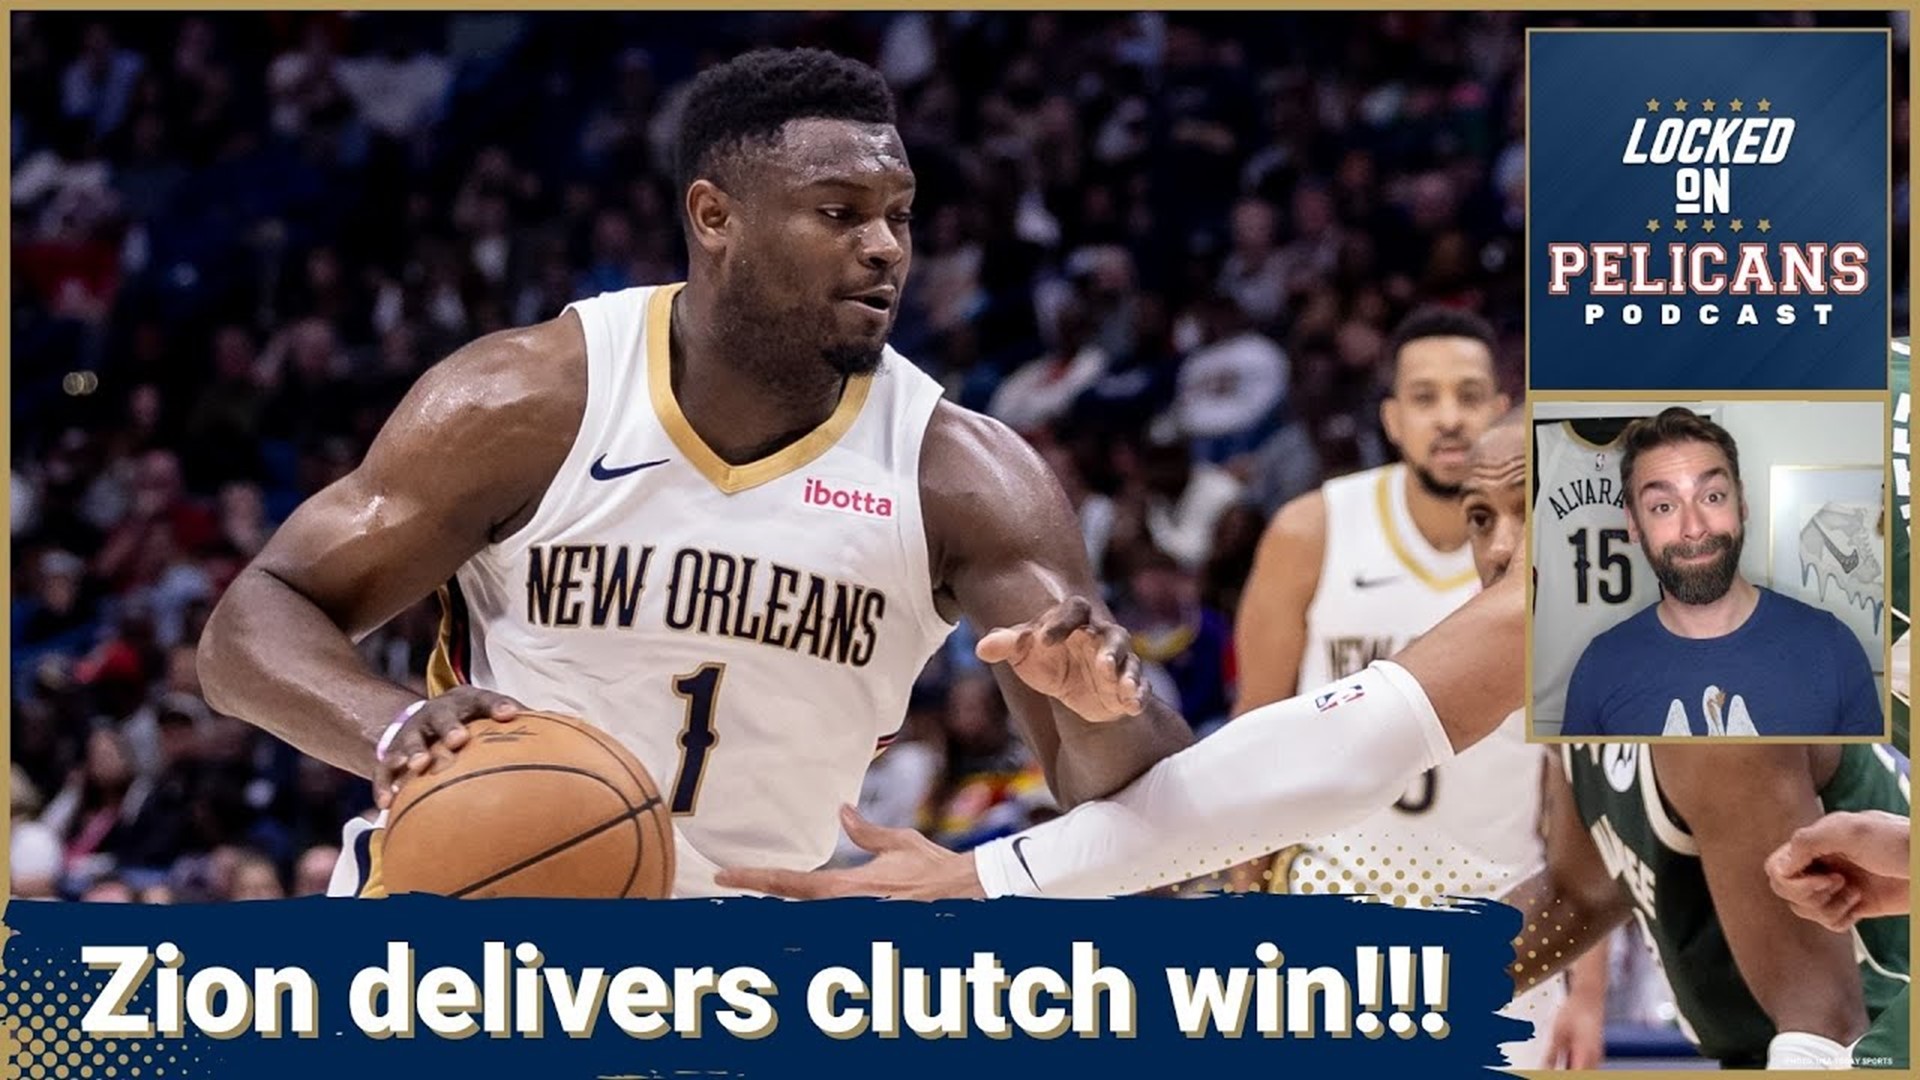 When the New Orleans Pelicans needed him the most Zion Williamson came through to deliver a clutch win